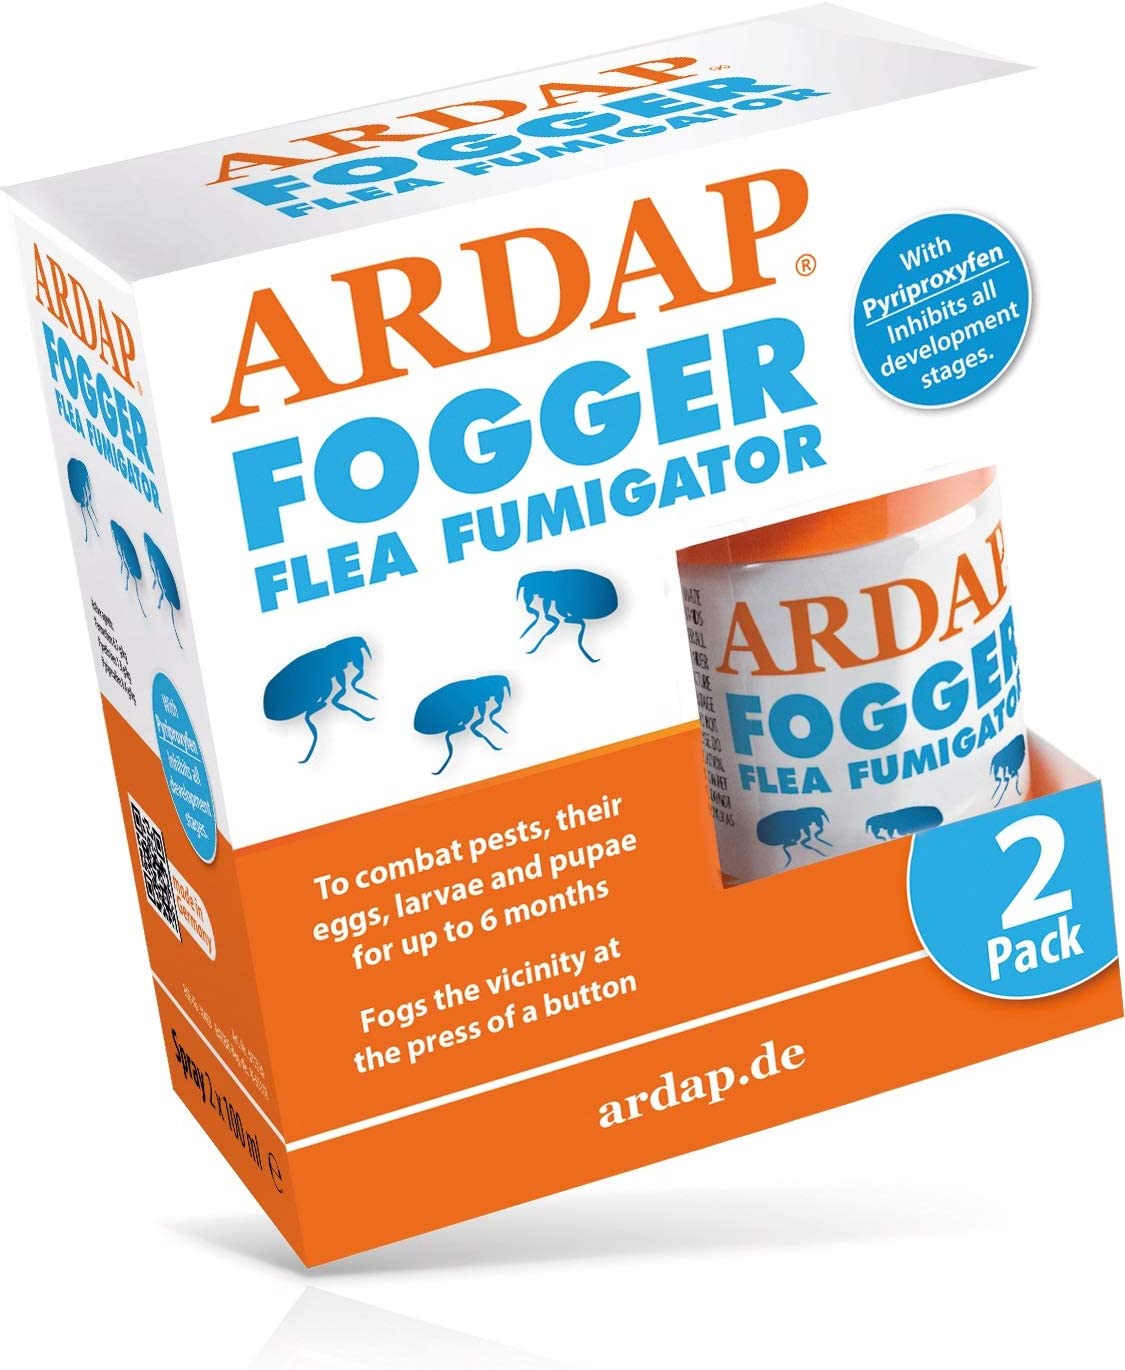 ARDAP Fogger Flea Fumigator 2x 100ml | Insect and bug killer for household and premises, Immediate and Long lasting effect